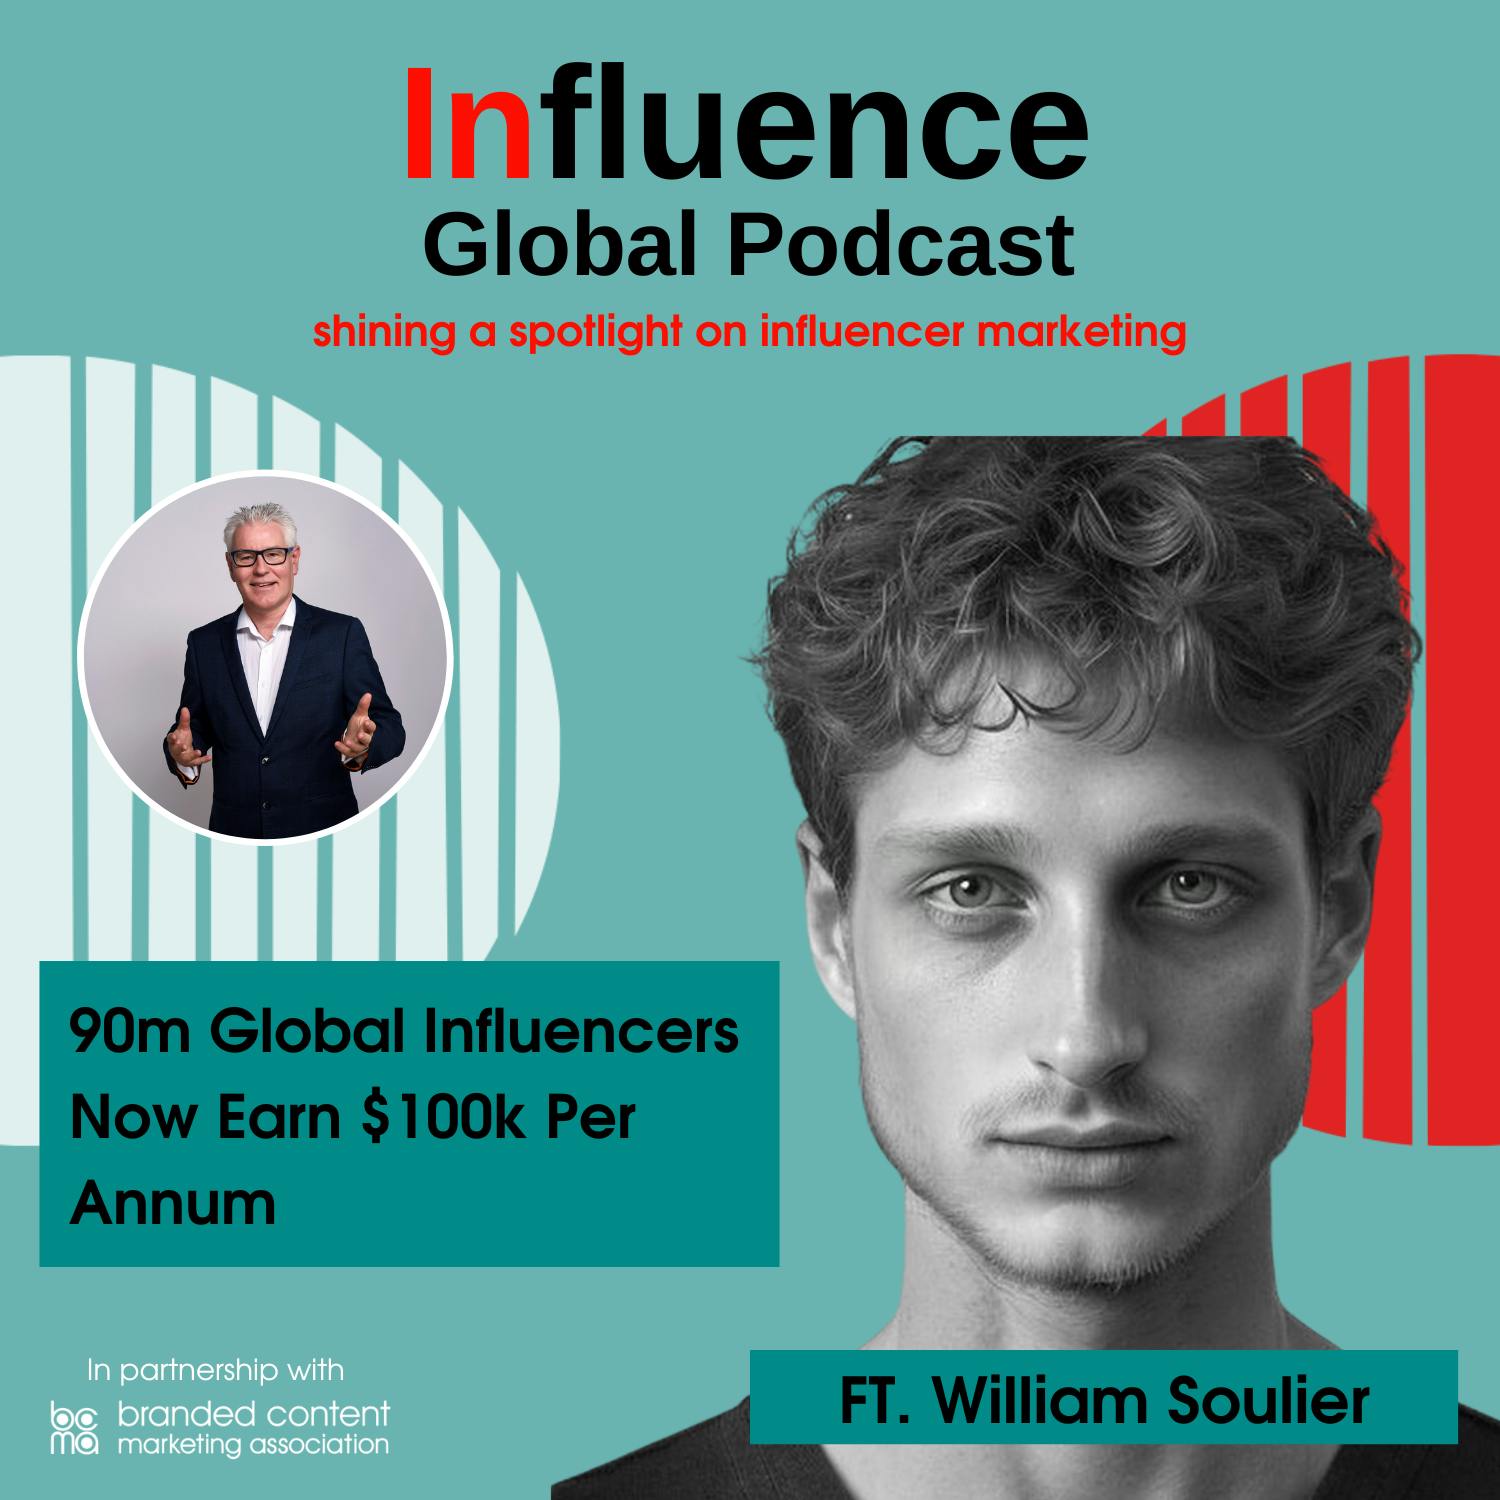 S7 Ep7: 90m Global Influencers Now Earn $100k Per Annum Ft. William Soulier